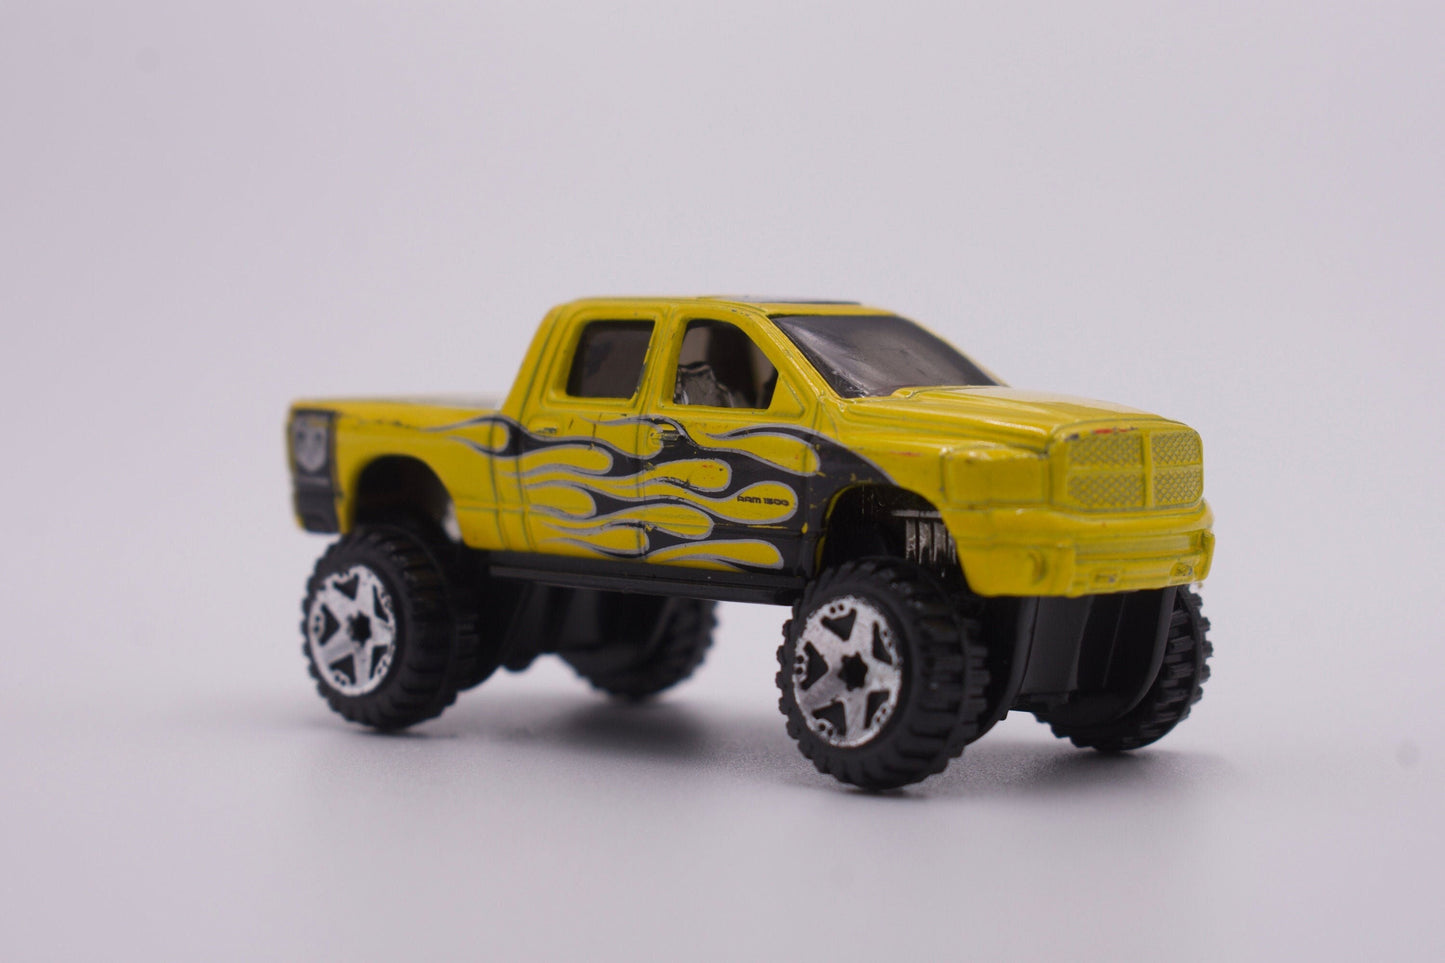 Hot Wheels Dodge Ram 1500 Yellow Team Hot Trucks Miniature Collectible Scale Model Toy Car